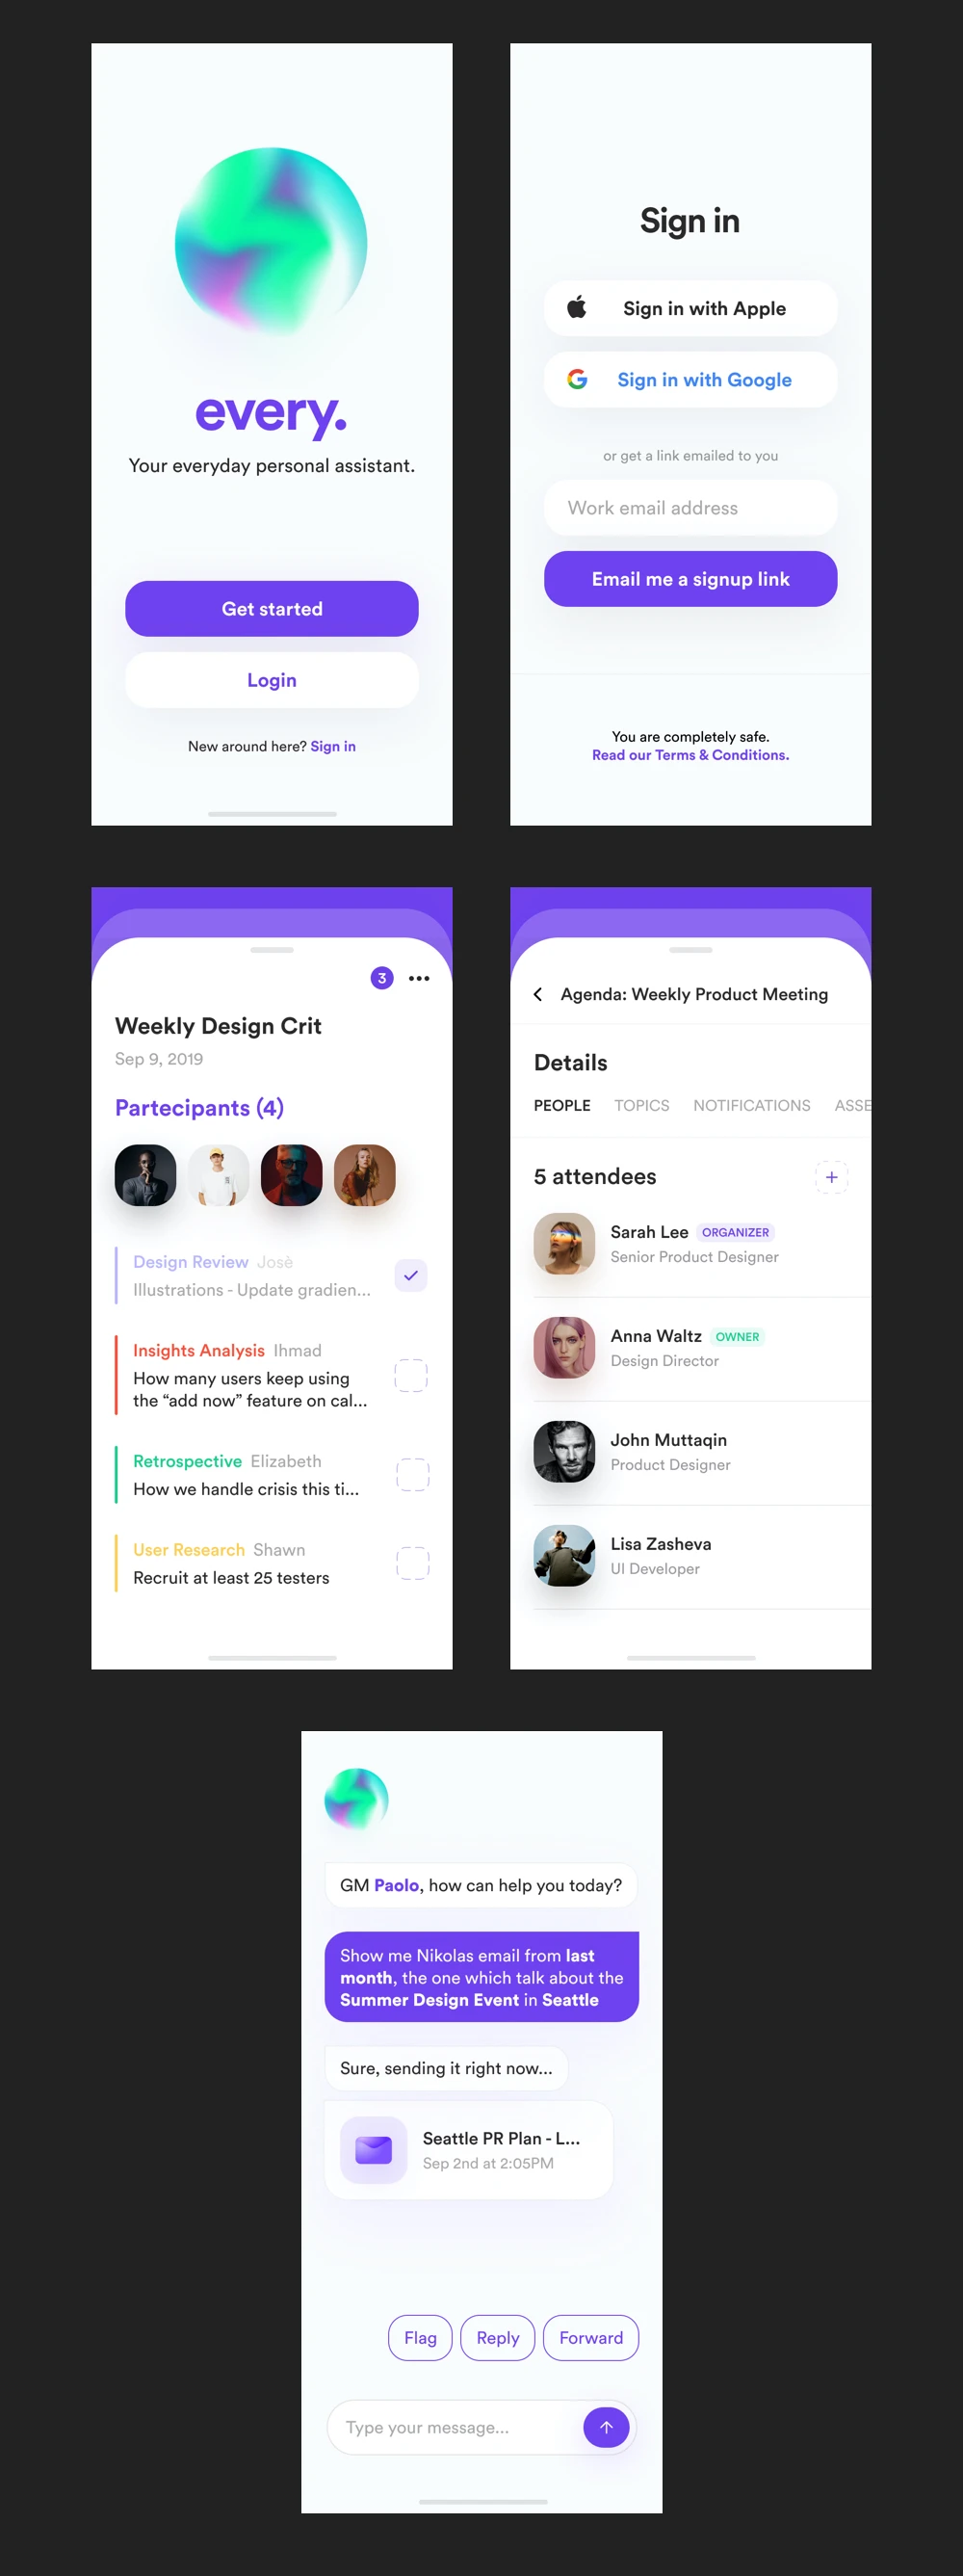 every. UI Kit for Figma - every. is a mobile app concept representing a personal assistant that can help you through your daily office routine